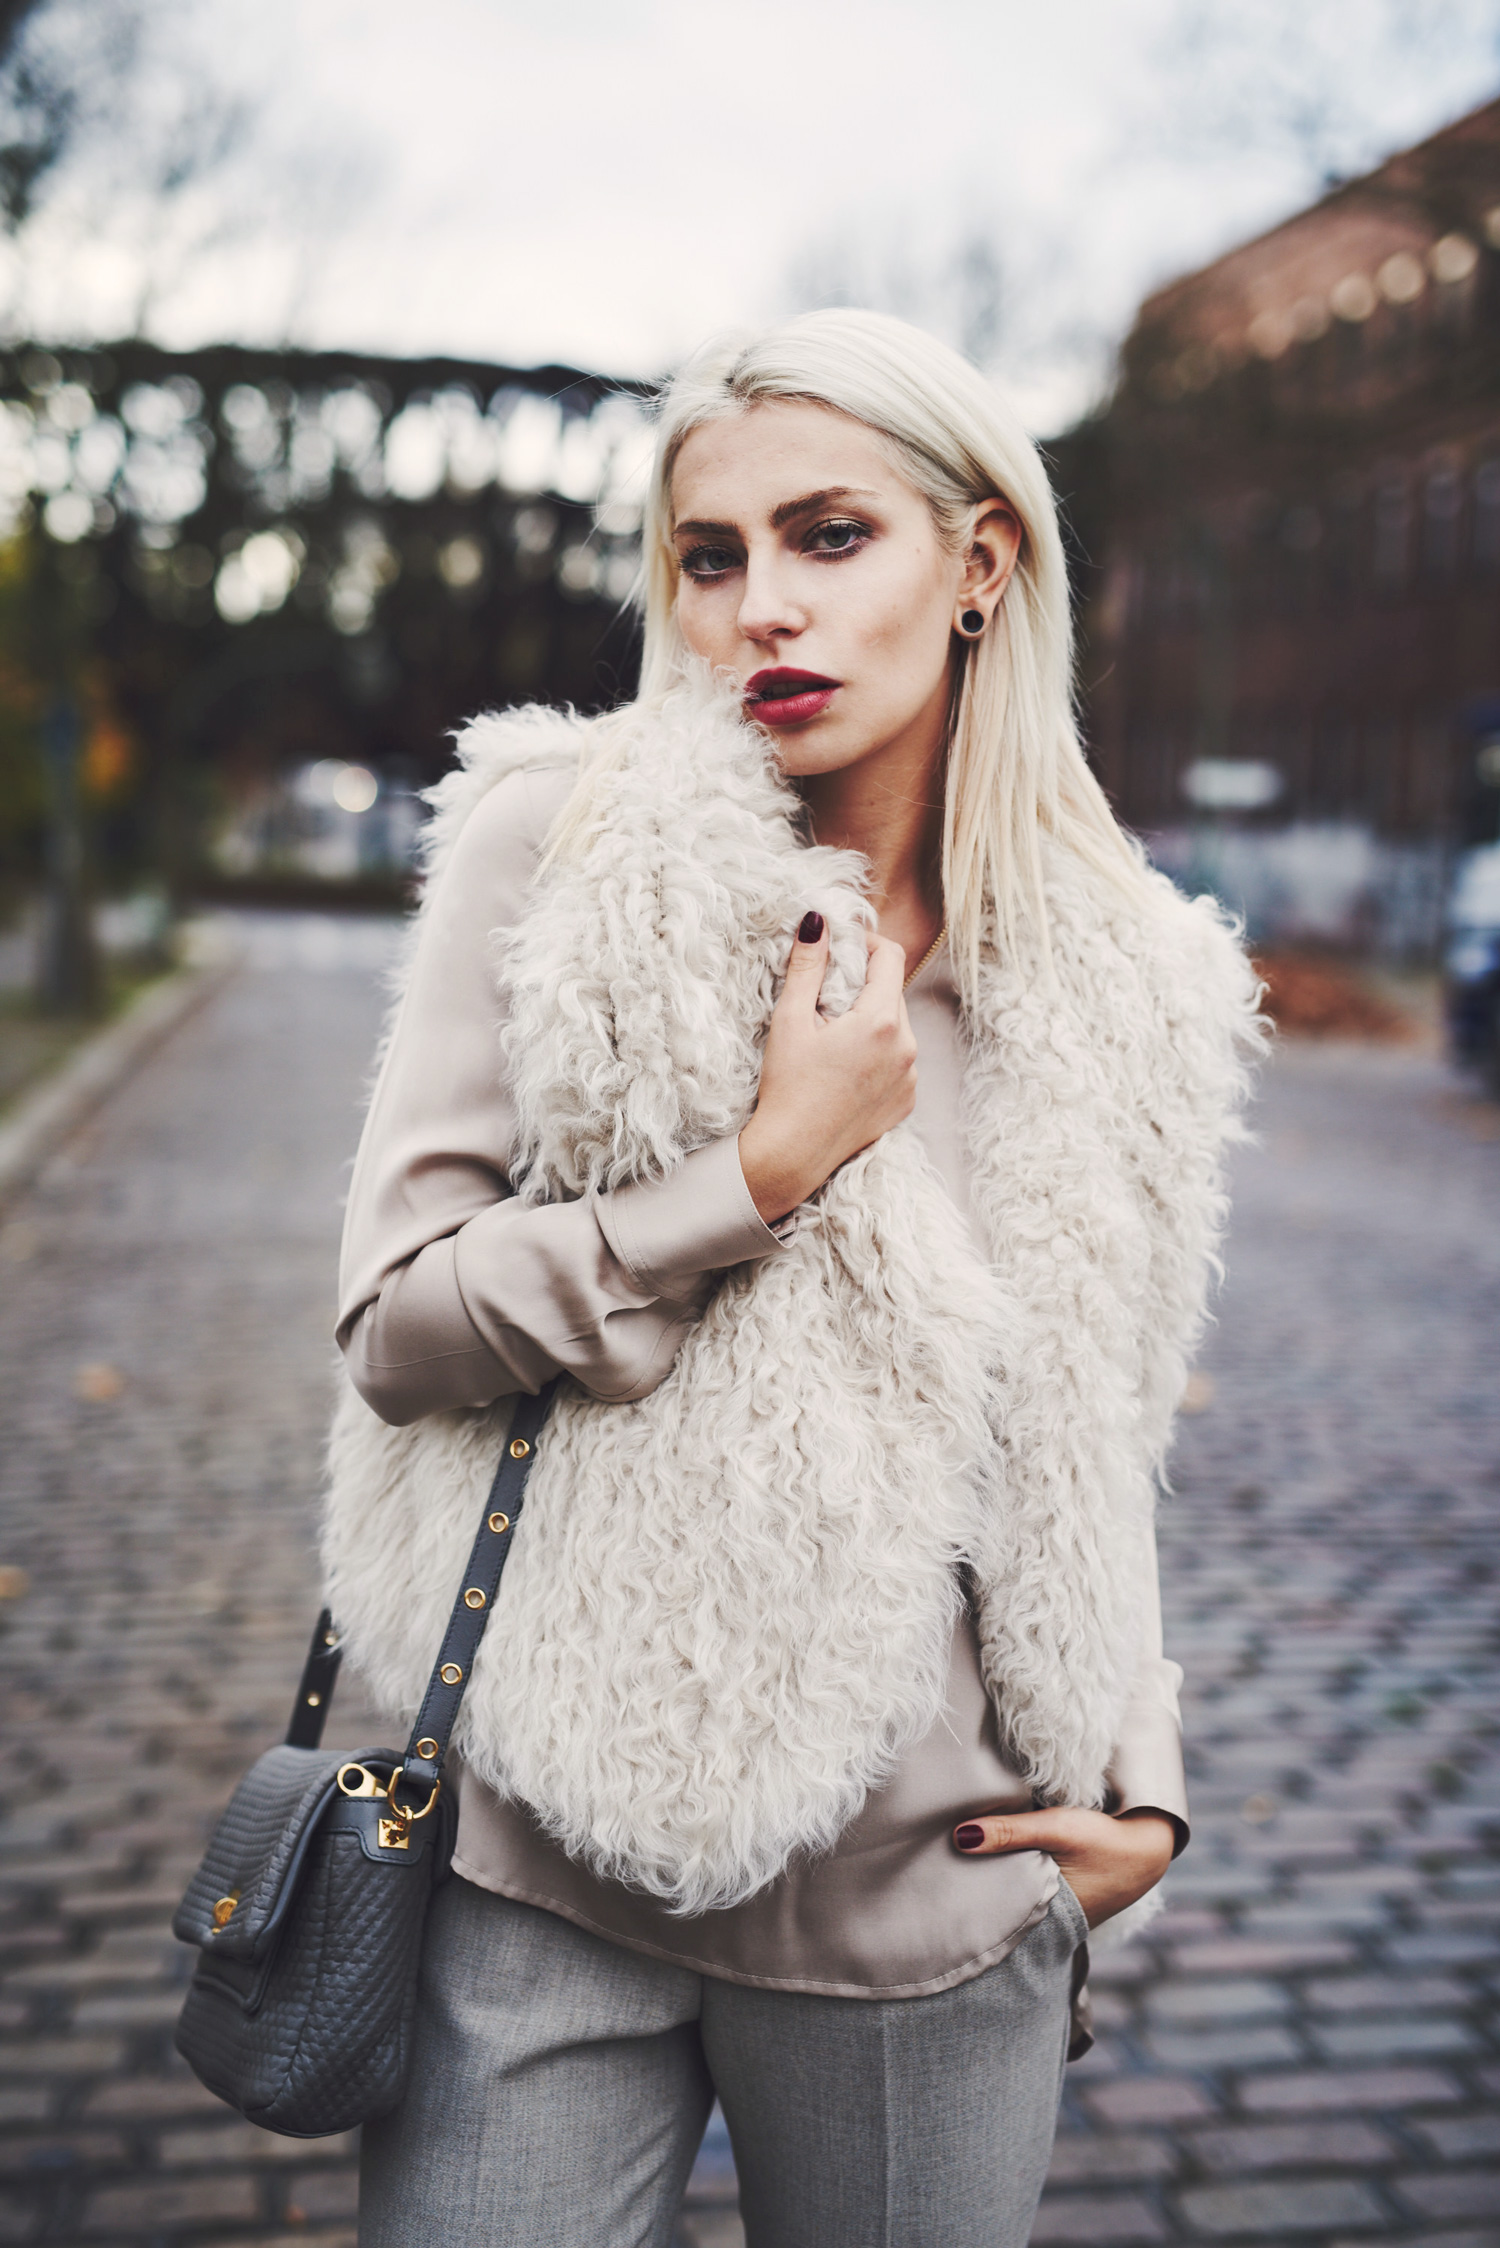 find more details on my blog | via Masha Sedgwick, fashion blogger from Berlin | street style | labels: SLY 010, Seductive, Vans, Sonia Rykiel | winter style